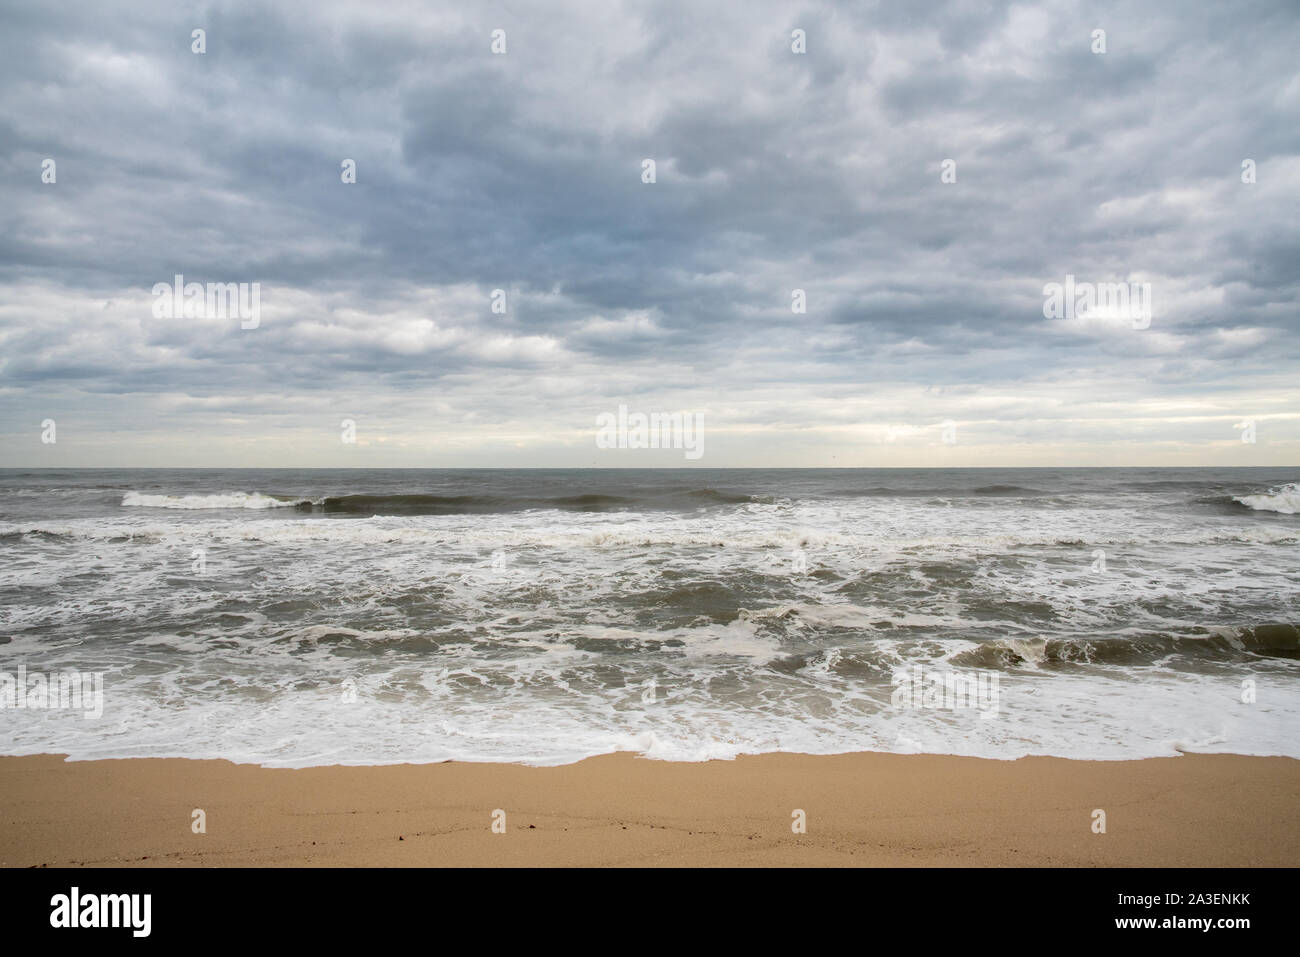 A seashore scene in which high waves come with cloudy weather and strong winds. South Korea Donghae the sea. Stock Photo